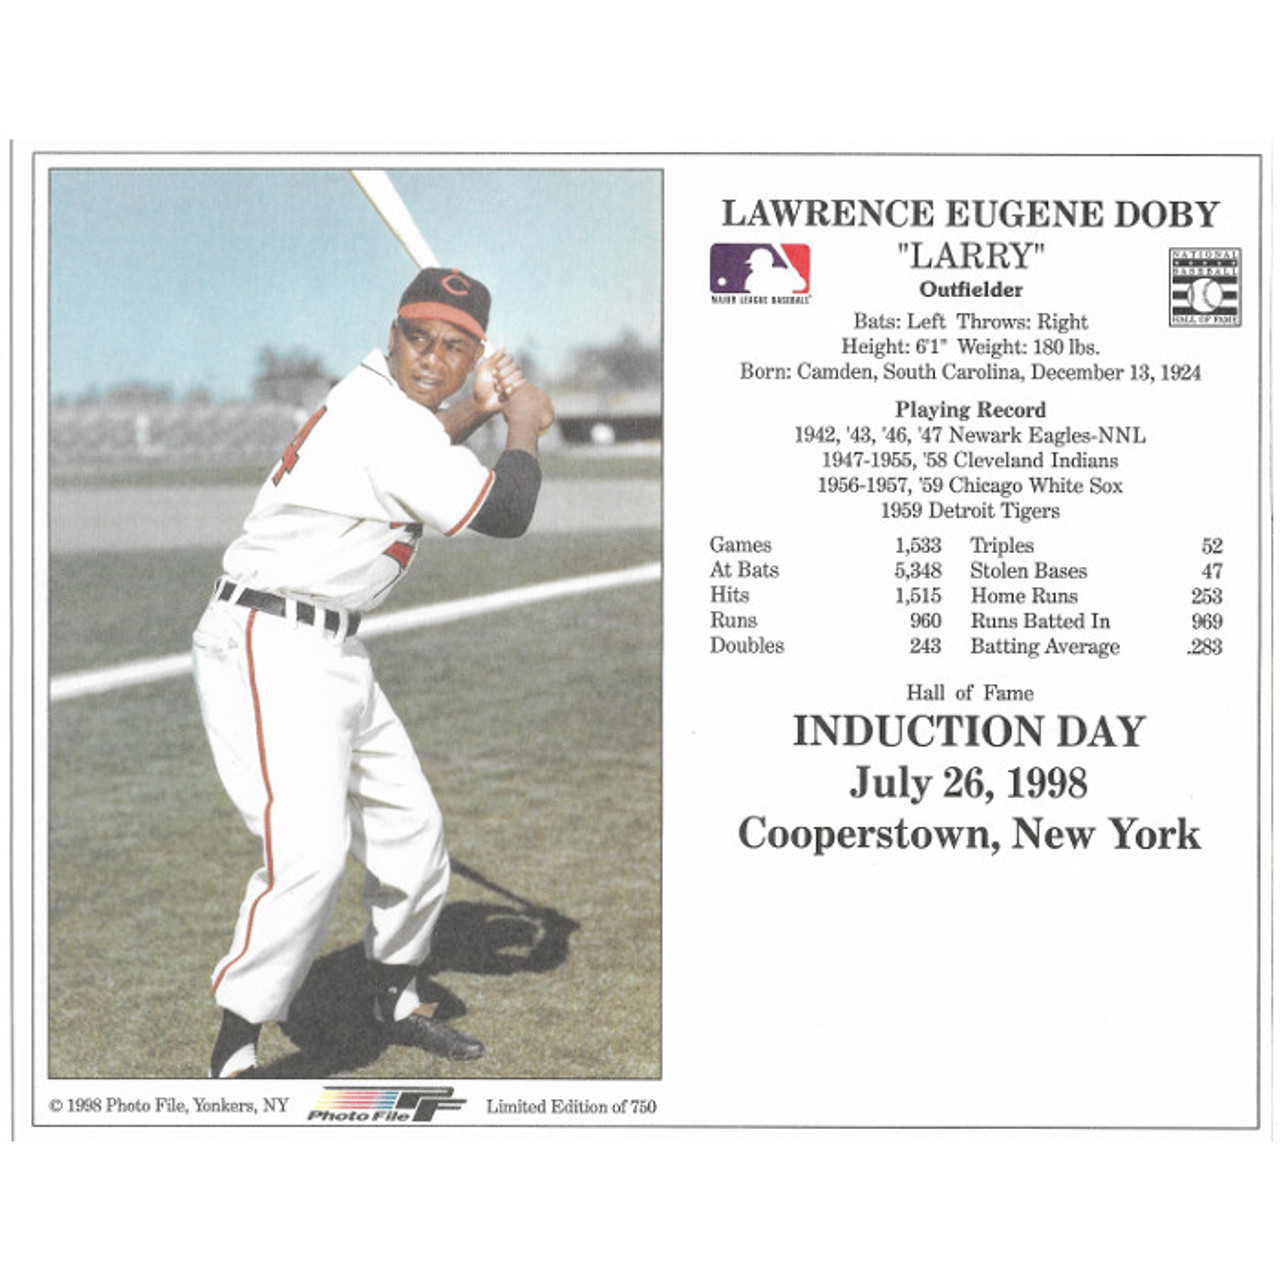 Larry Doby (Baseball Hall of Fame Outfielder) - On This Day